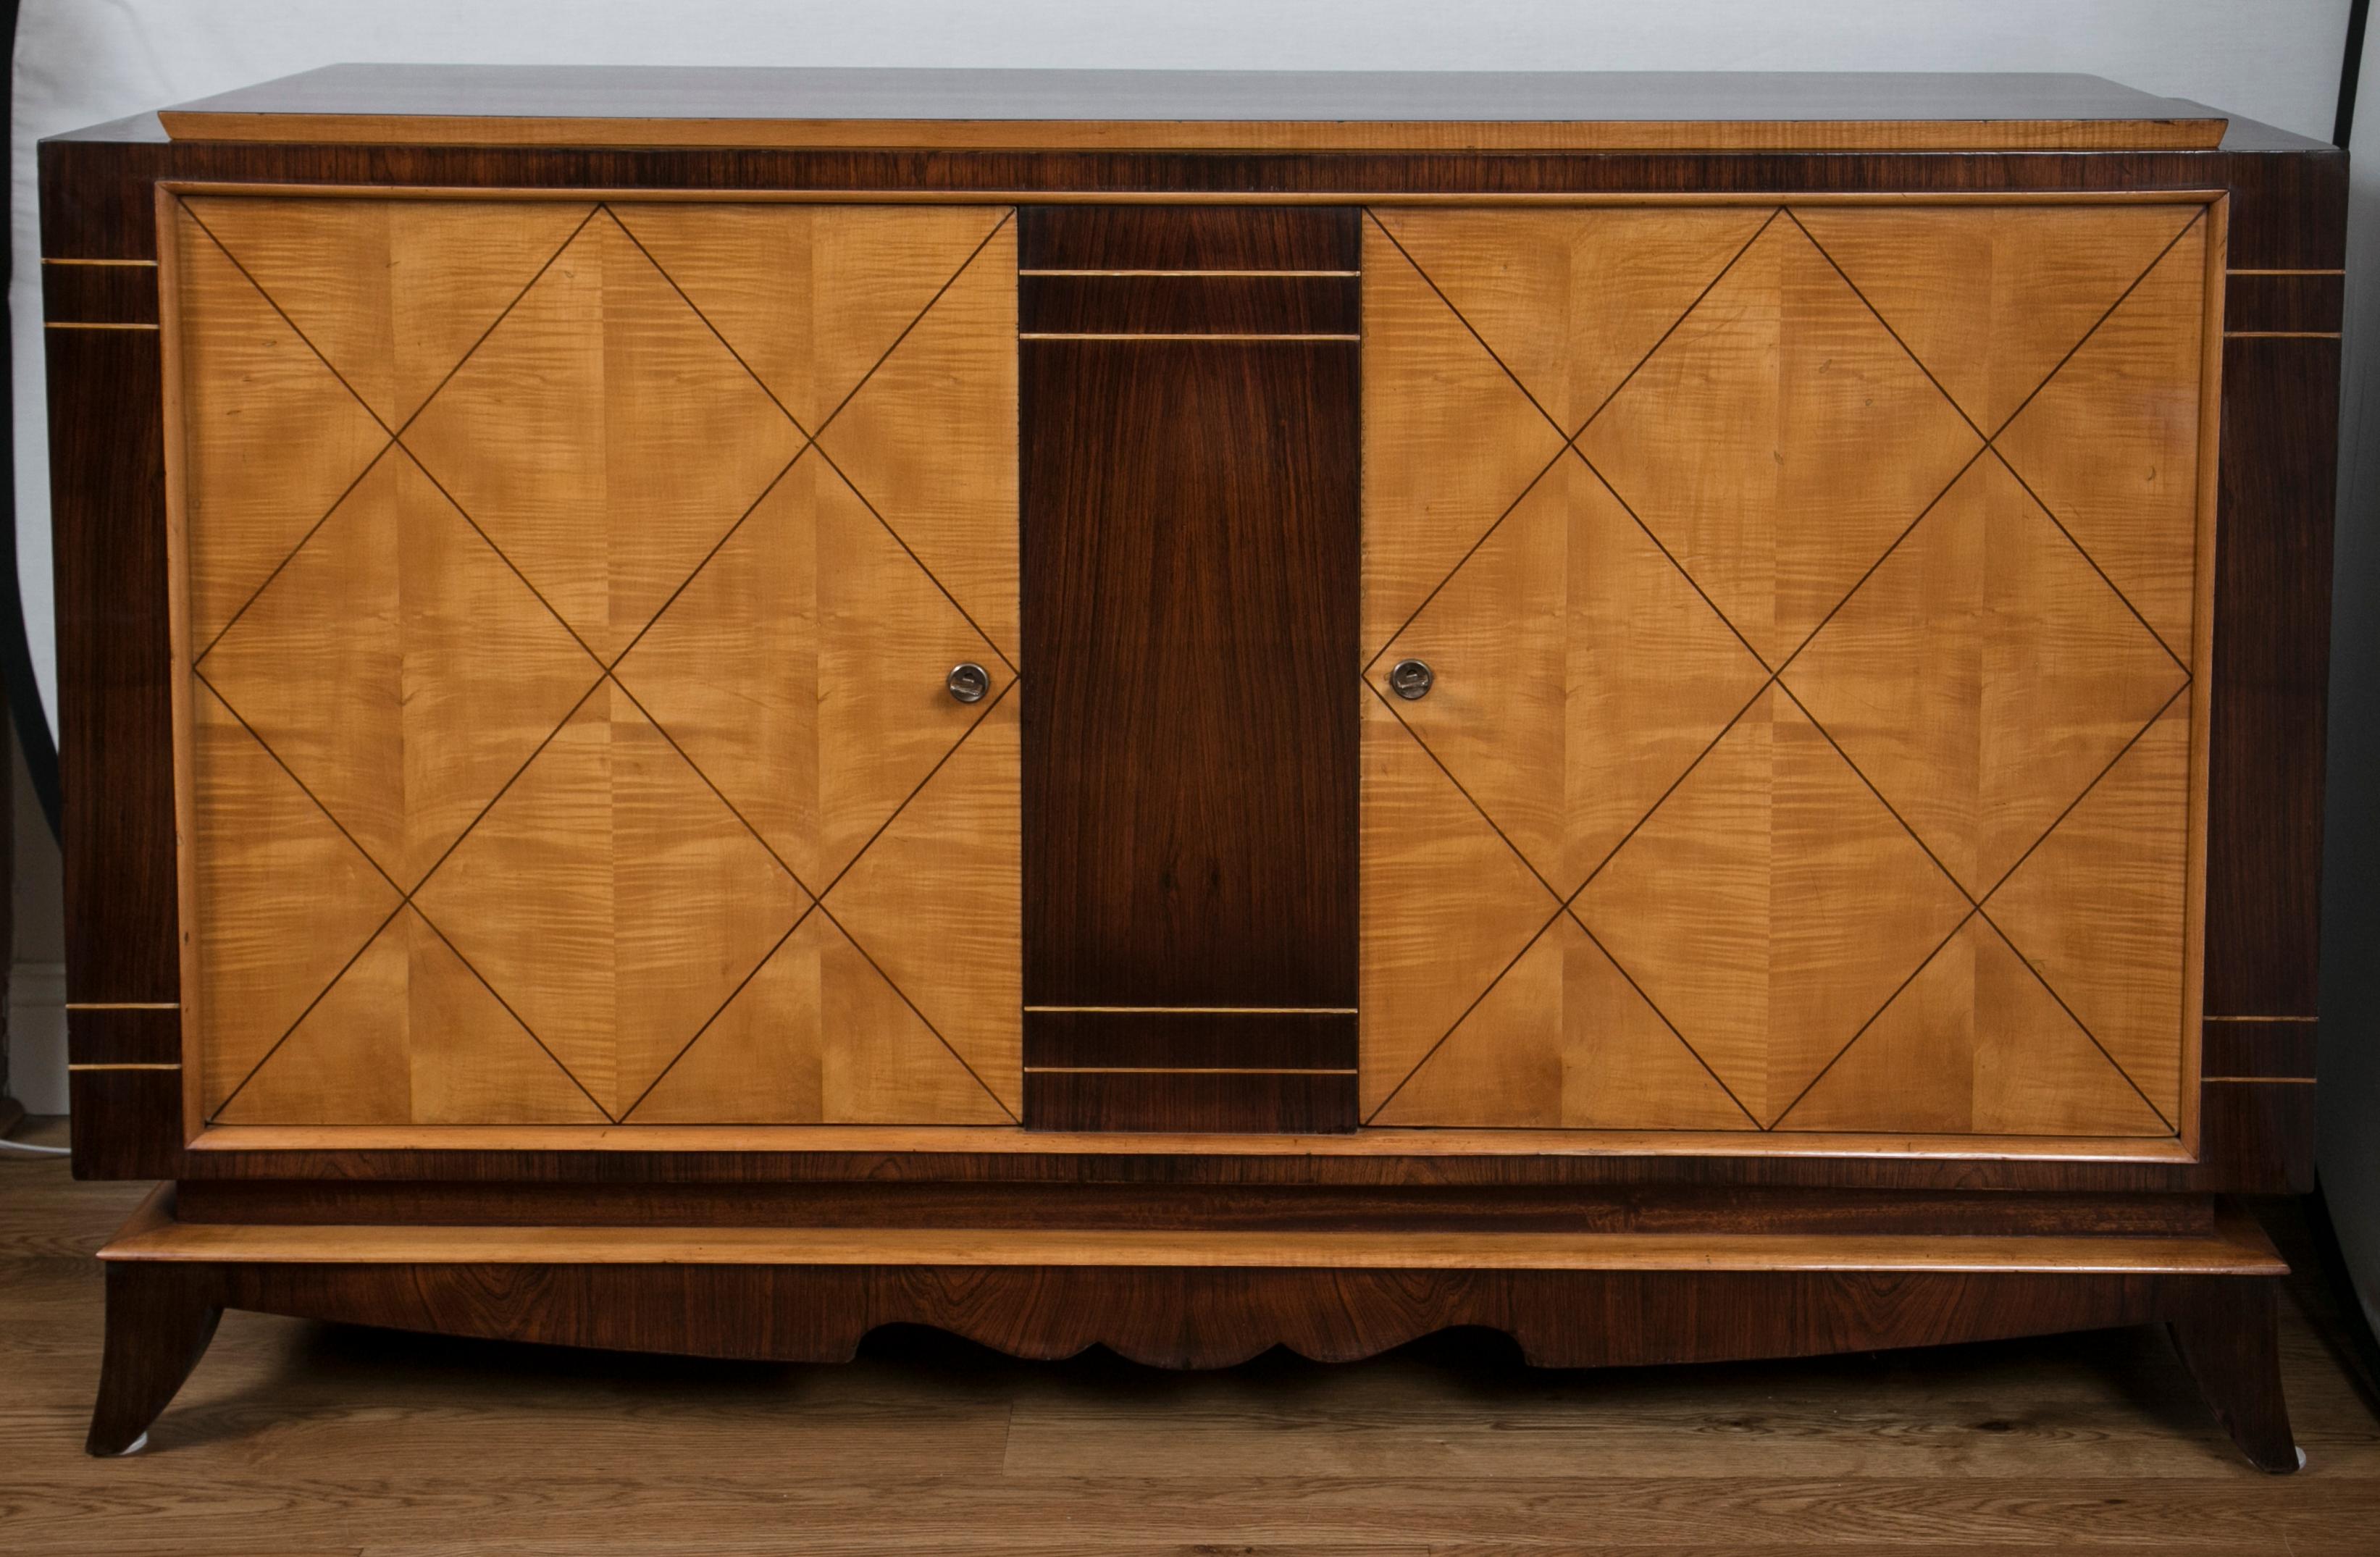 Mid-20th Century French Modernist Sideboard